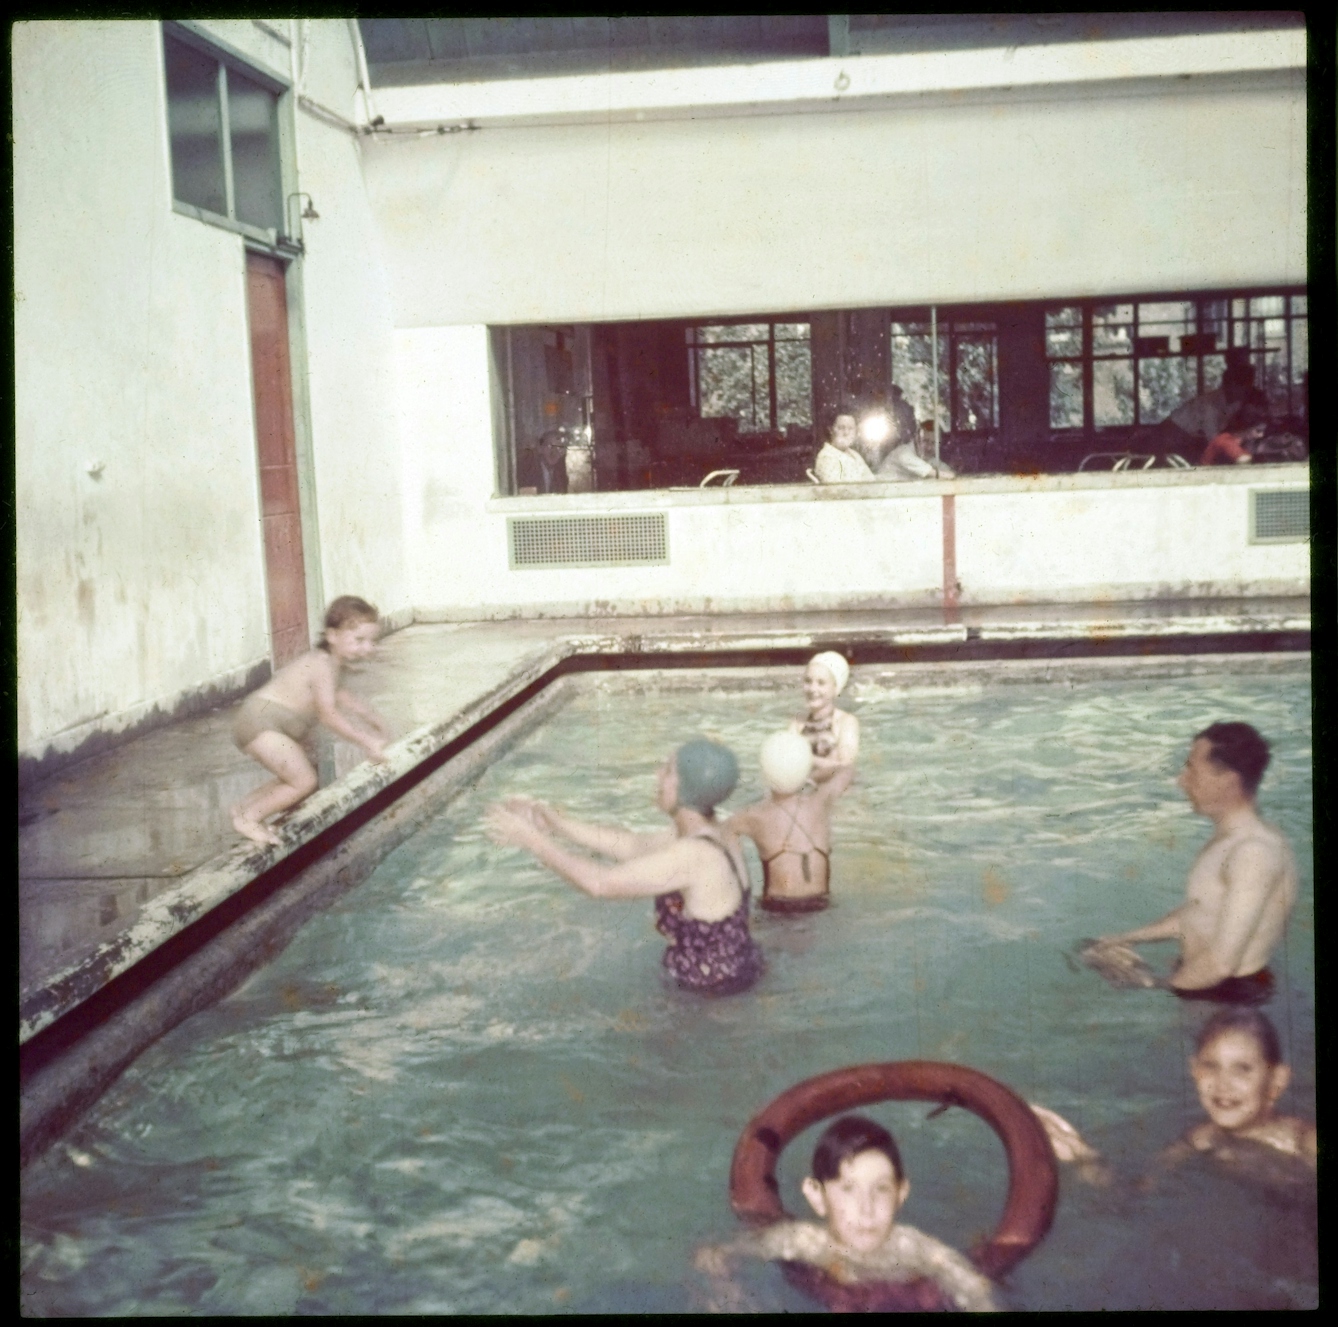 Colour photograph of families in the pool at the Peckham Pioneer Health Centre, showing a child jumping in, a woman and girls wearing rubber swimming hats, and a child with an inflatable ring. In the background is a window through which people are sitting watching the swimmers.